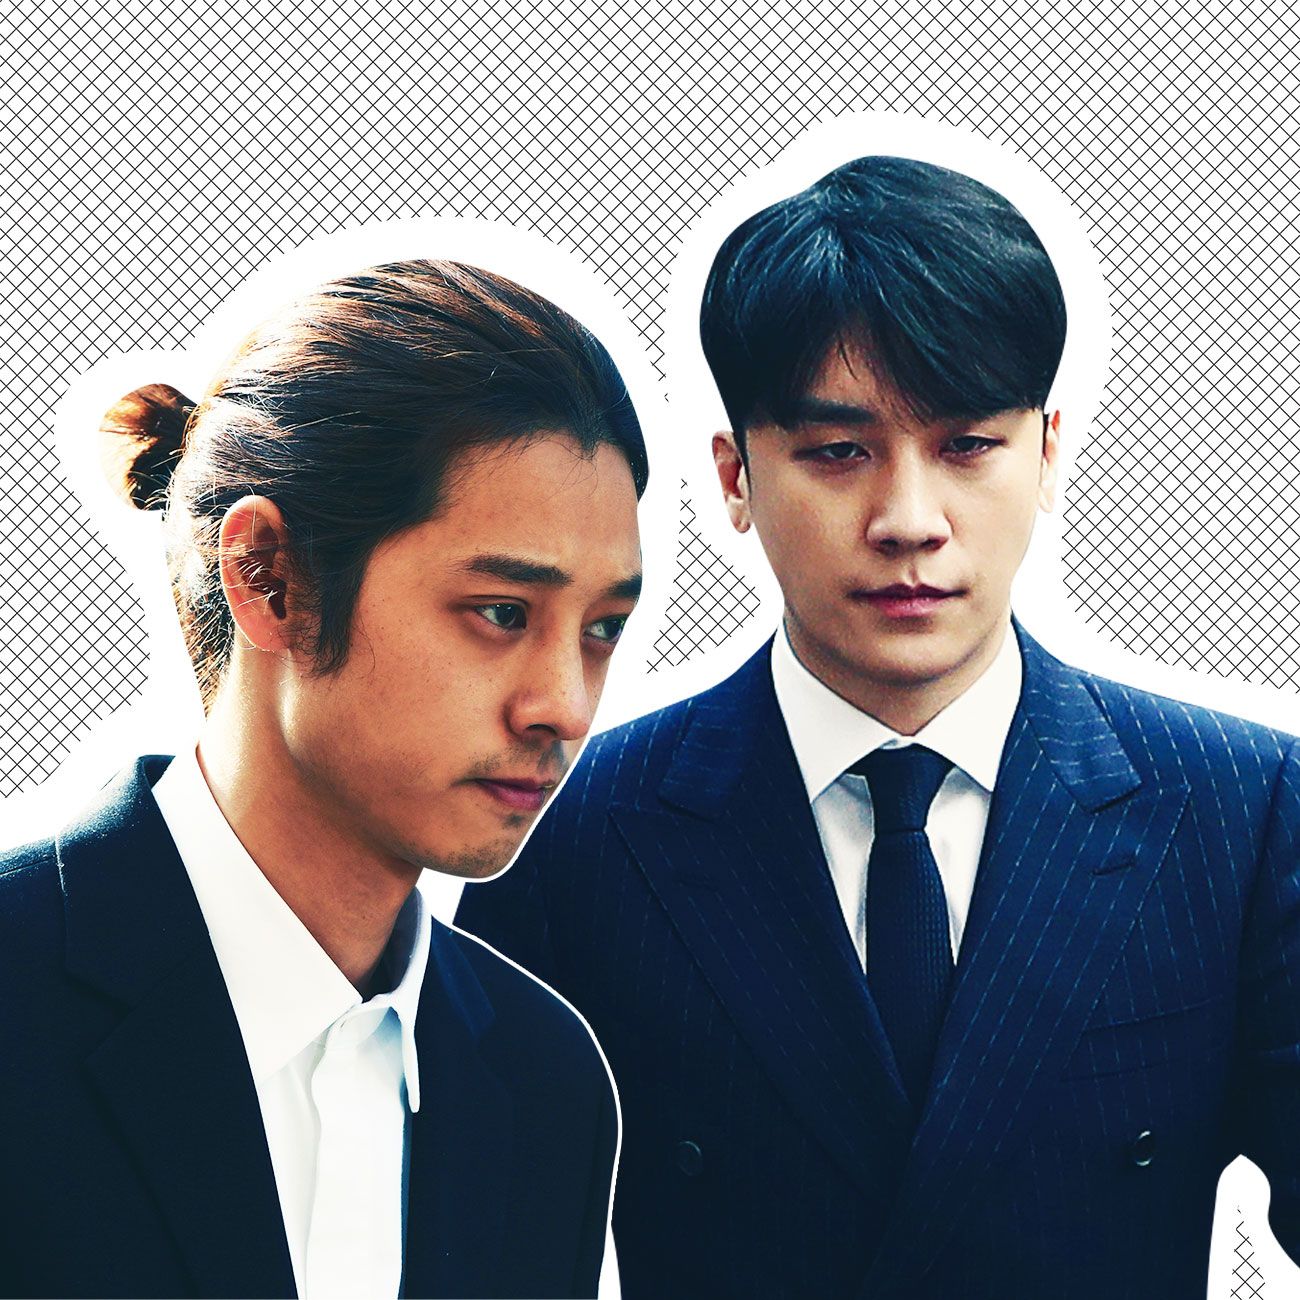 Force Korean Sex Video - Jung Joon-Young, Seungri Charged in K-Pop Sex-Video Scandal